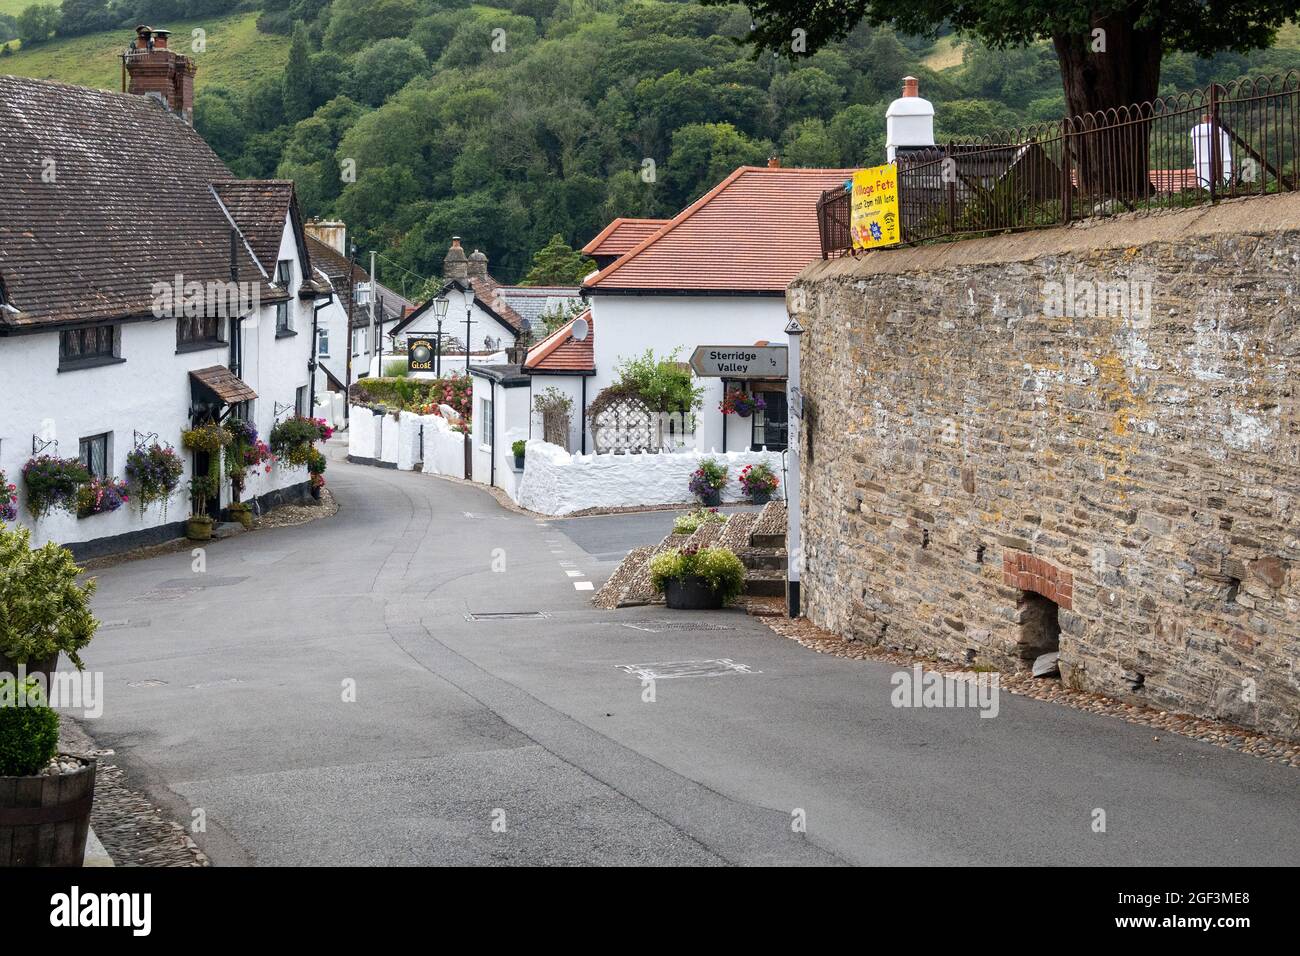 BERRYNARBOR, DEVON, UK - AUGUST 17 : View of the scenic village of Berrynarbor in Devon on August 17, 2021 Stock Photo